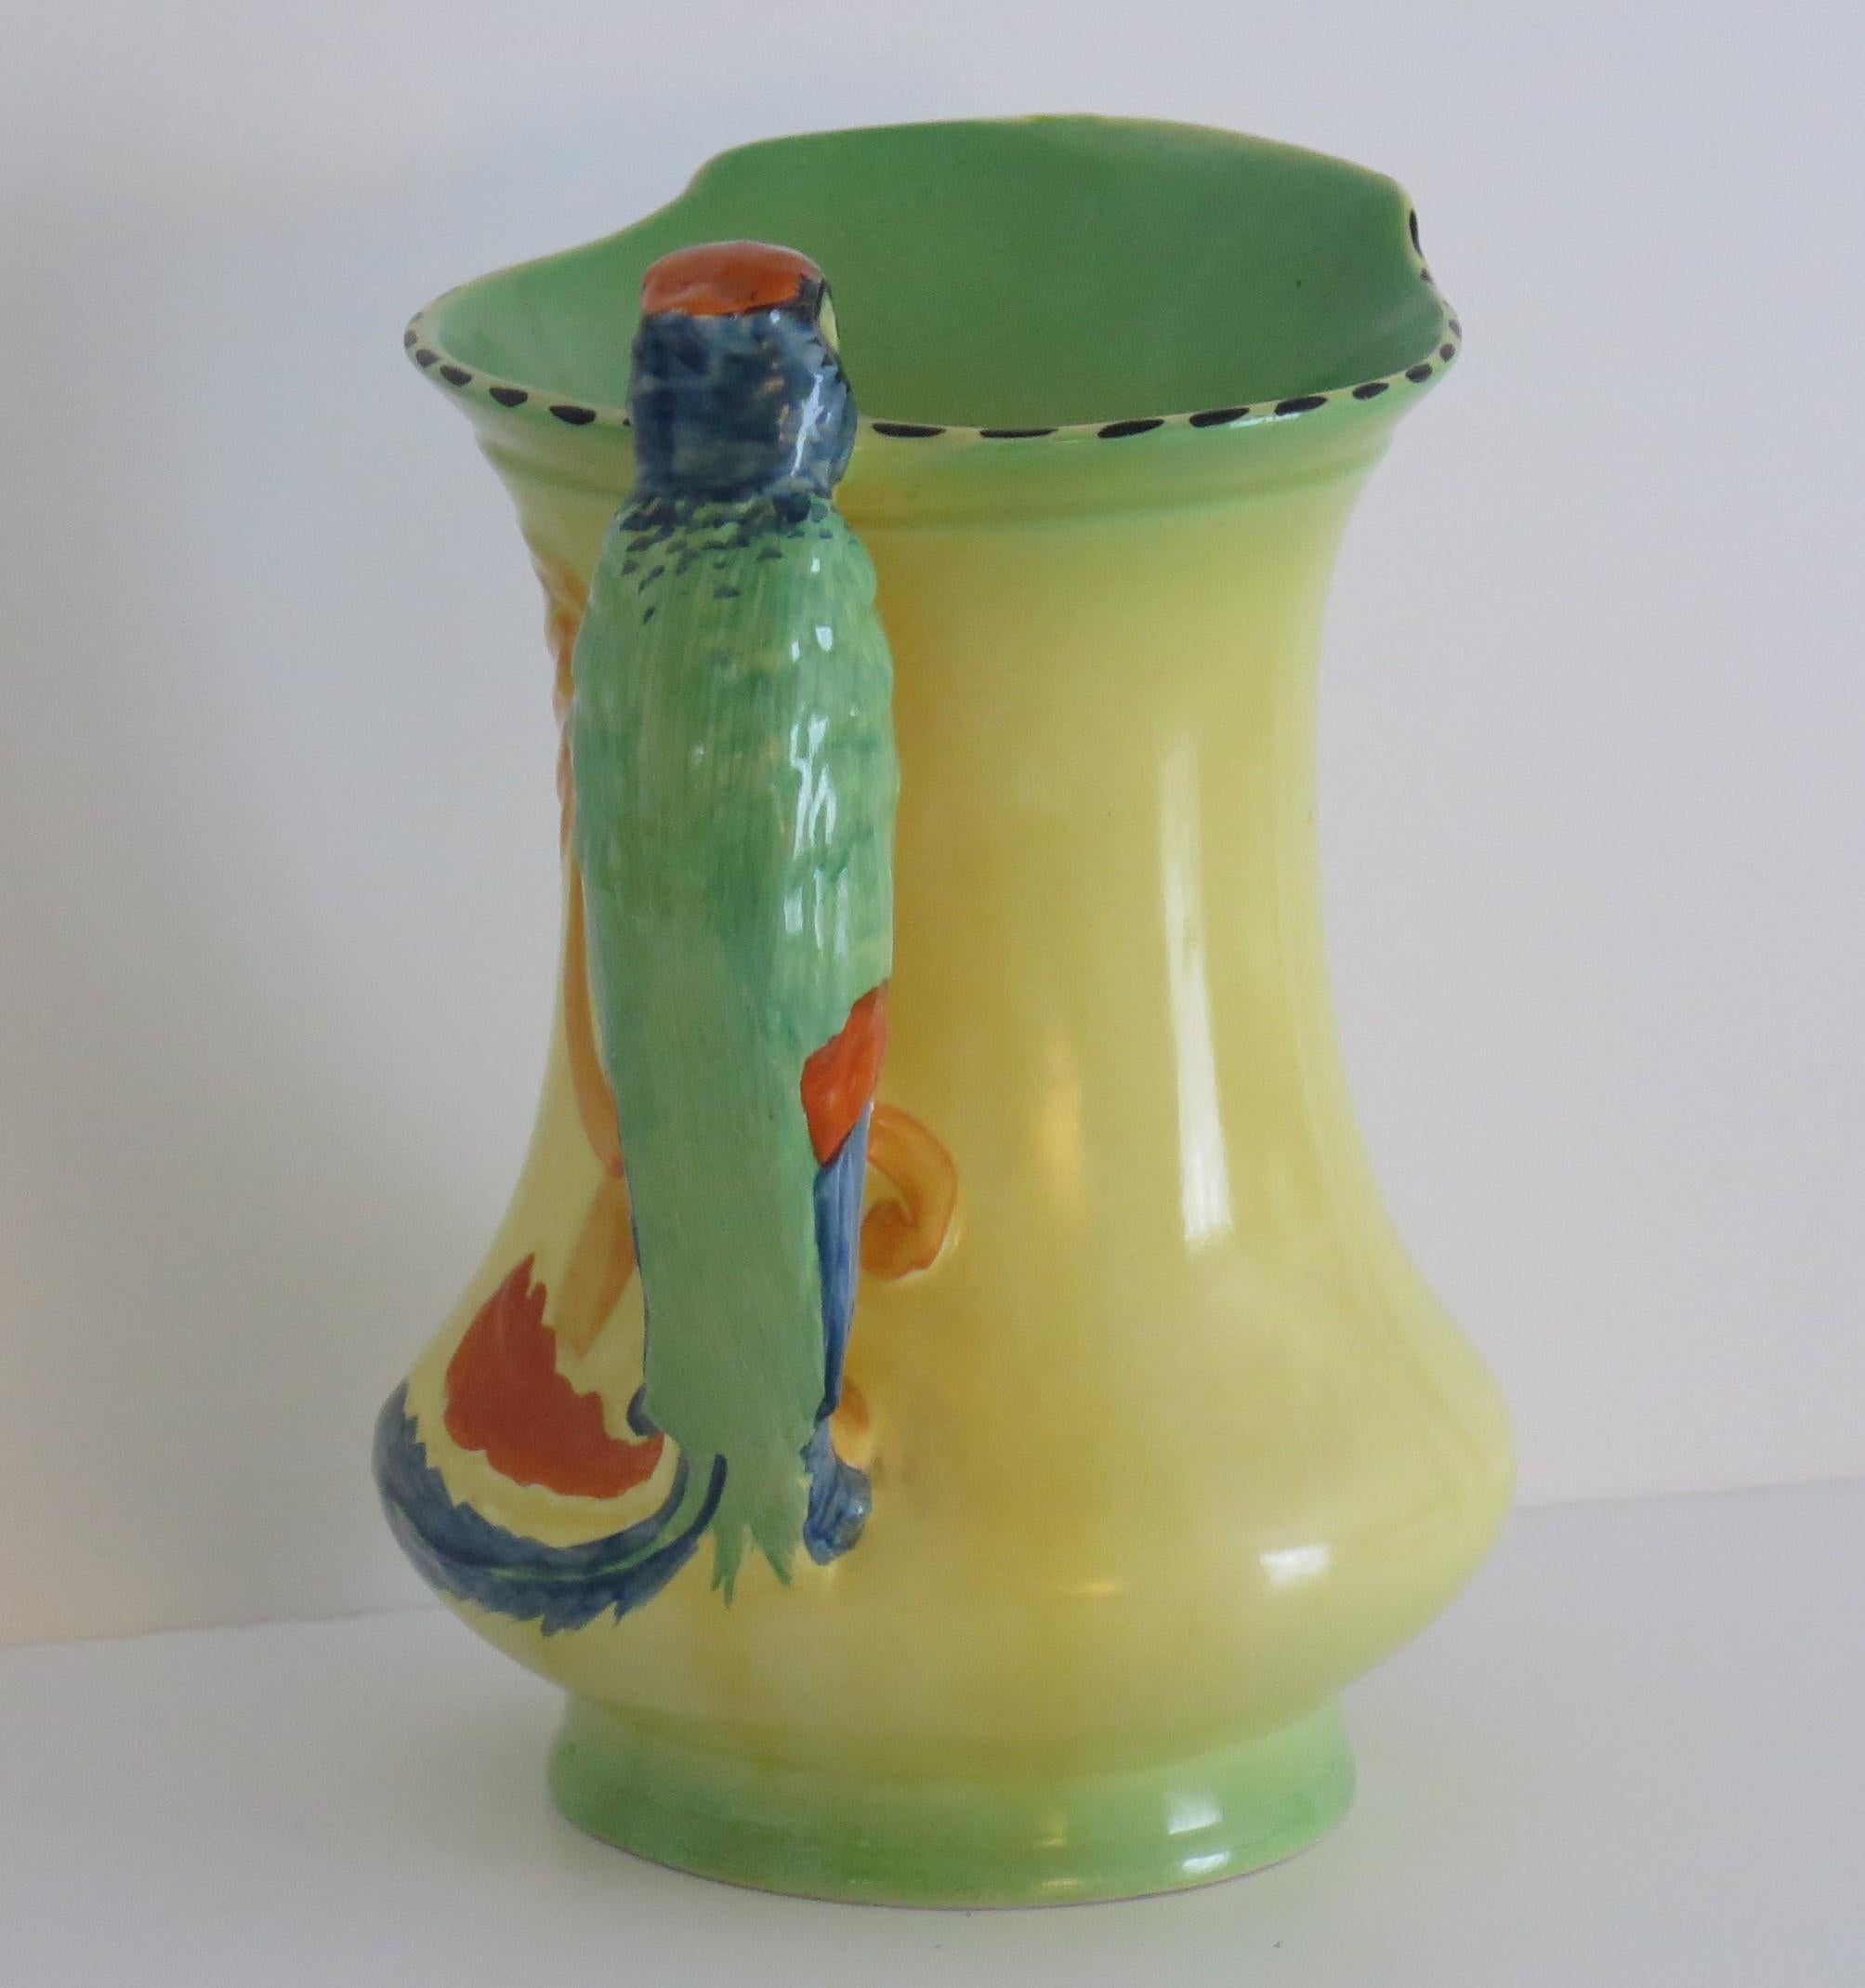 20th Century Art Deco Burleigh Ware Pottery Jug or Pitcher Parrot Handle Hand-Painted, 1930s For Sale